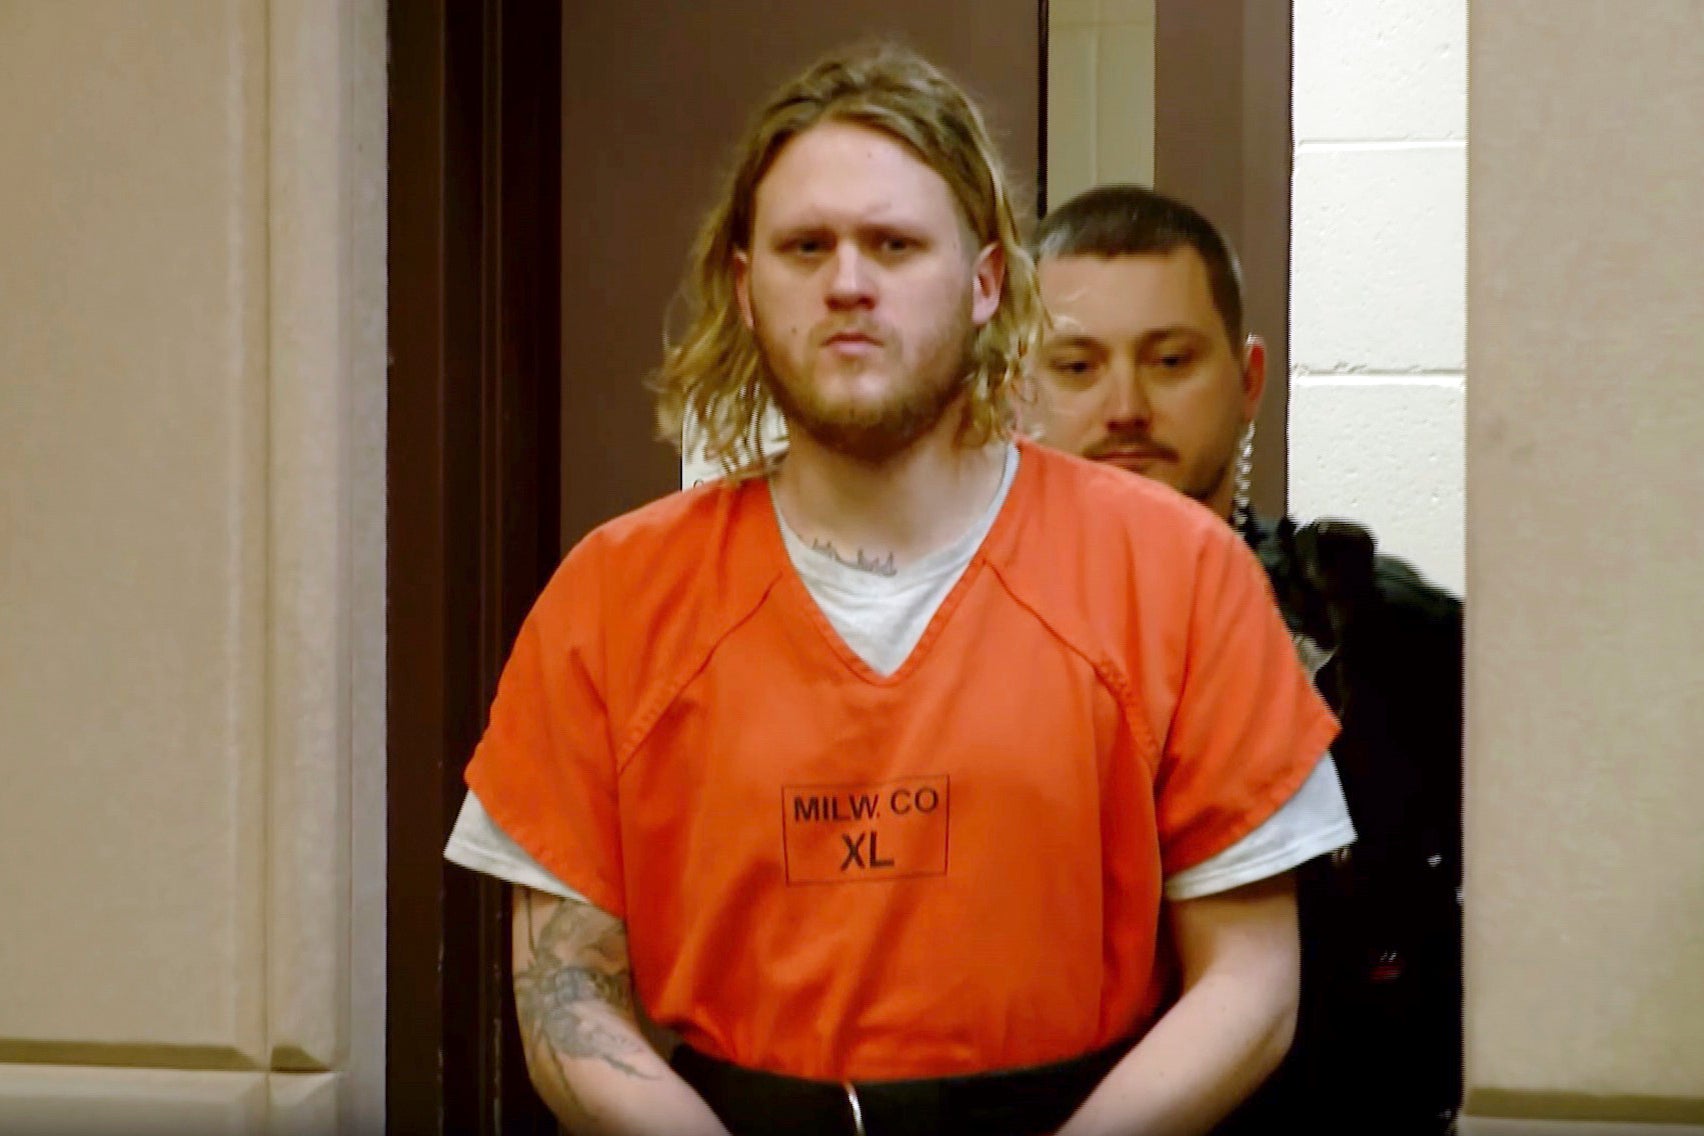 Maxwell Anderson’s initial court appearance on 12 April